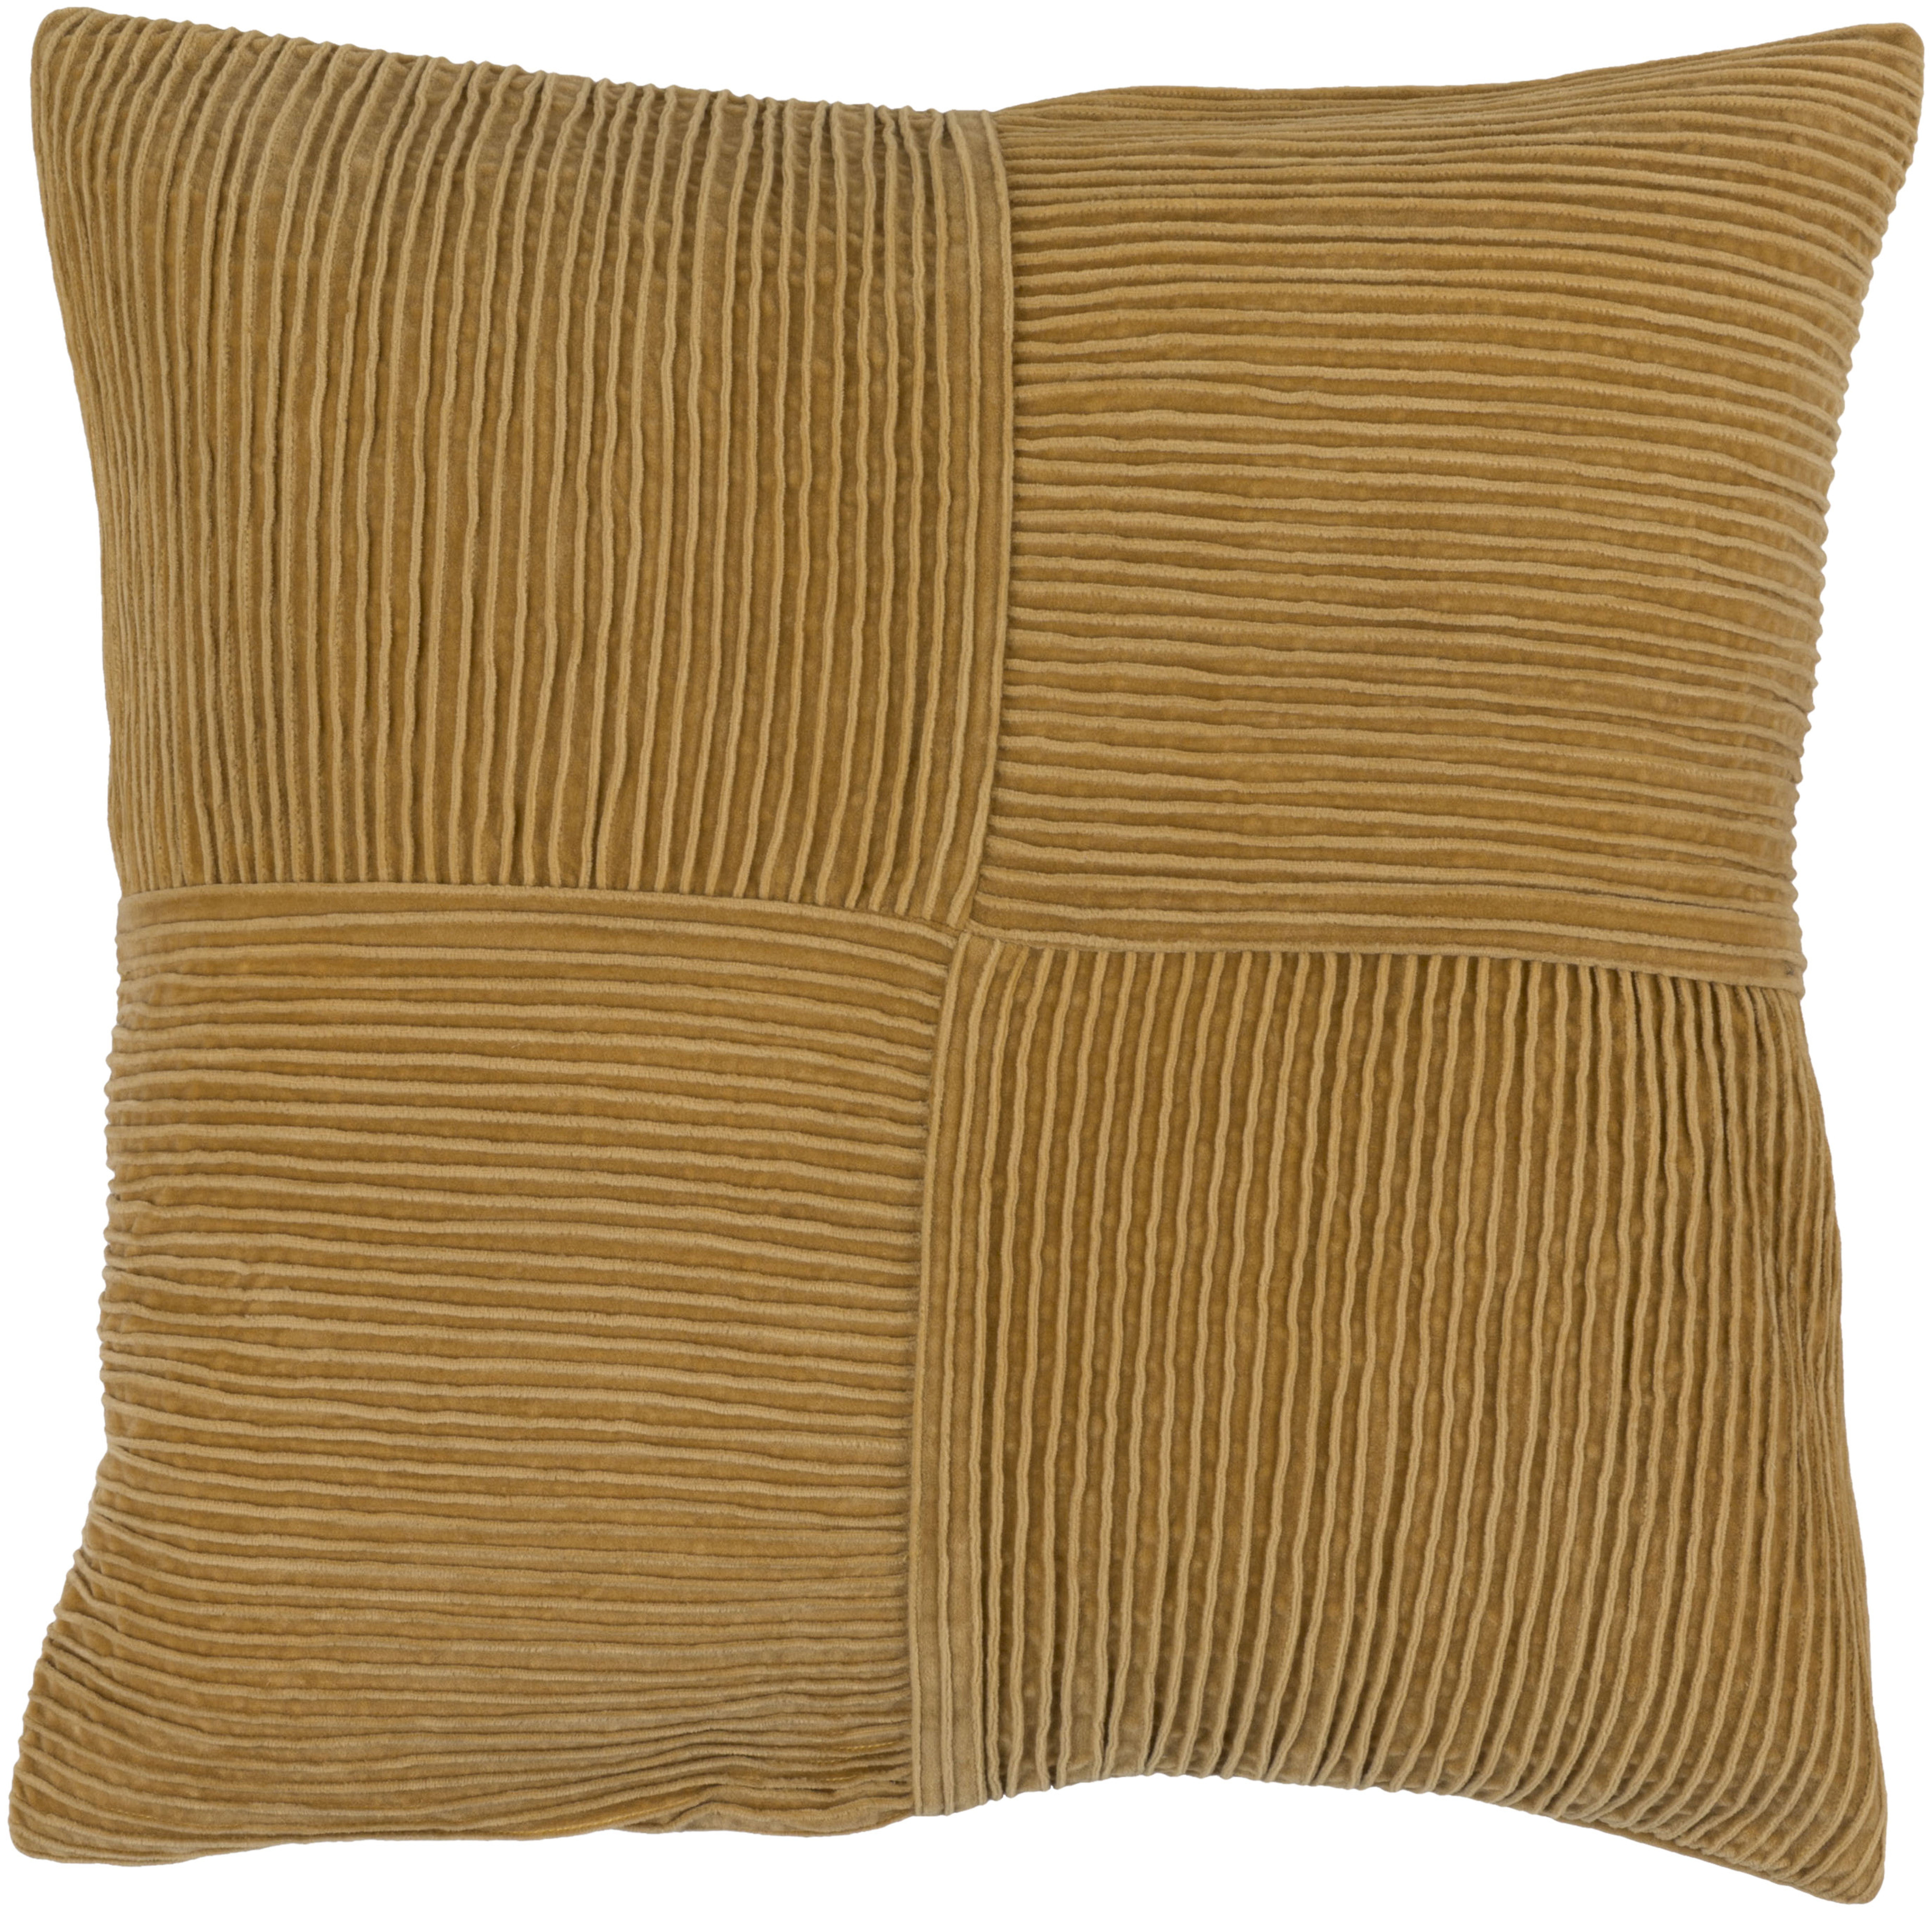 Conrad Throw Pillow, 18" x 18", with down insert - Surya